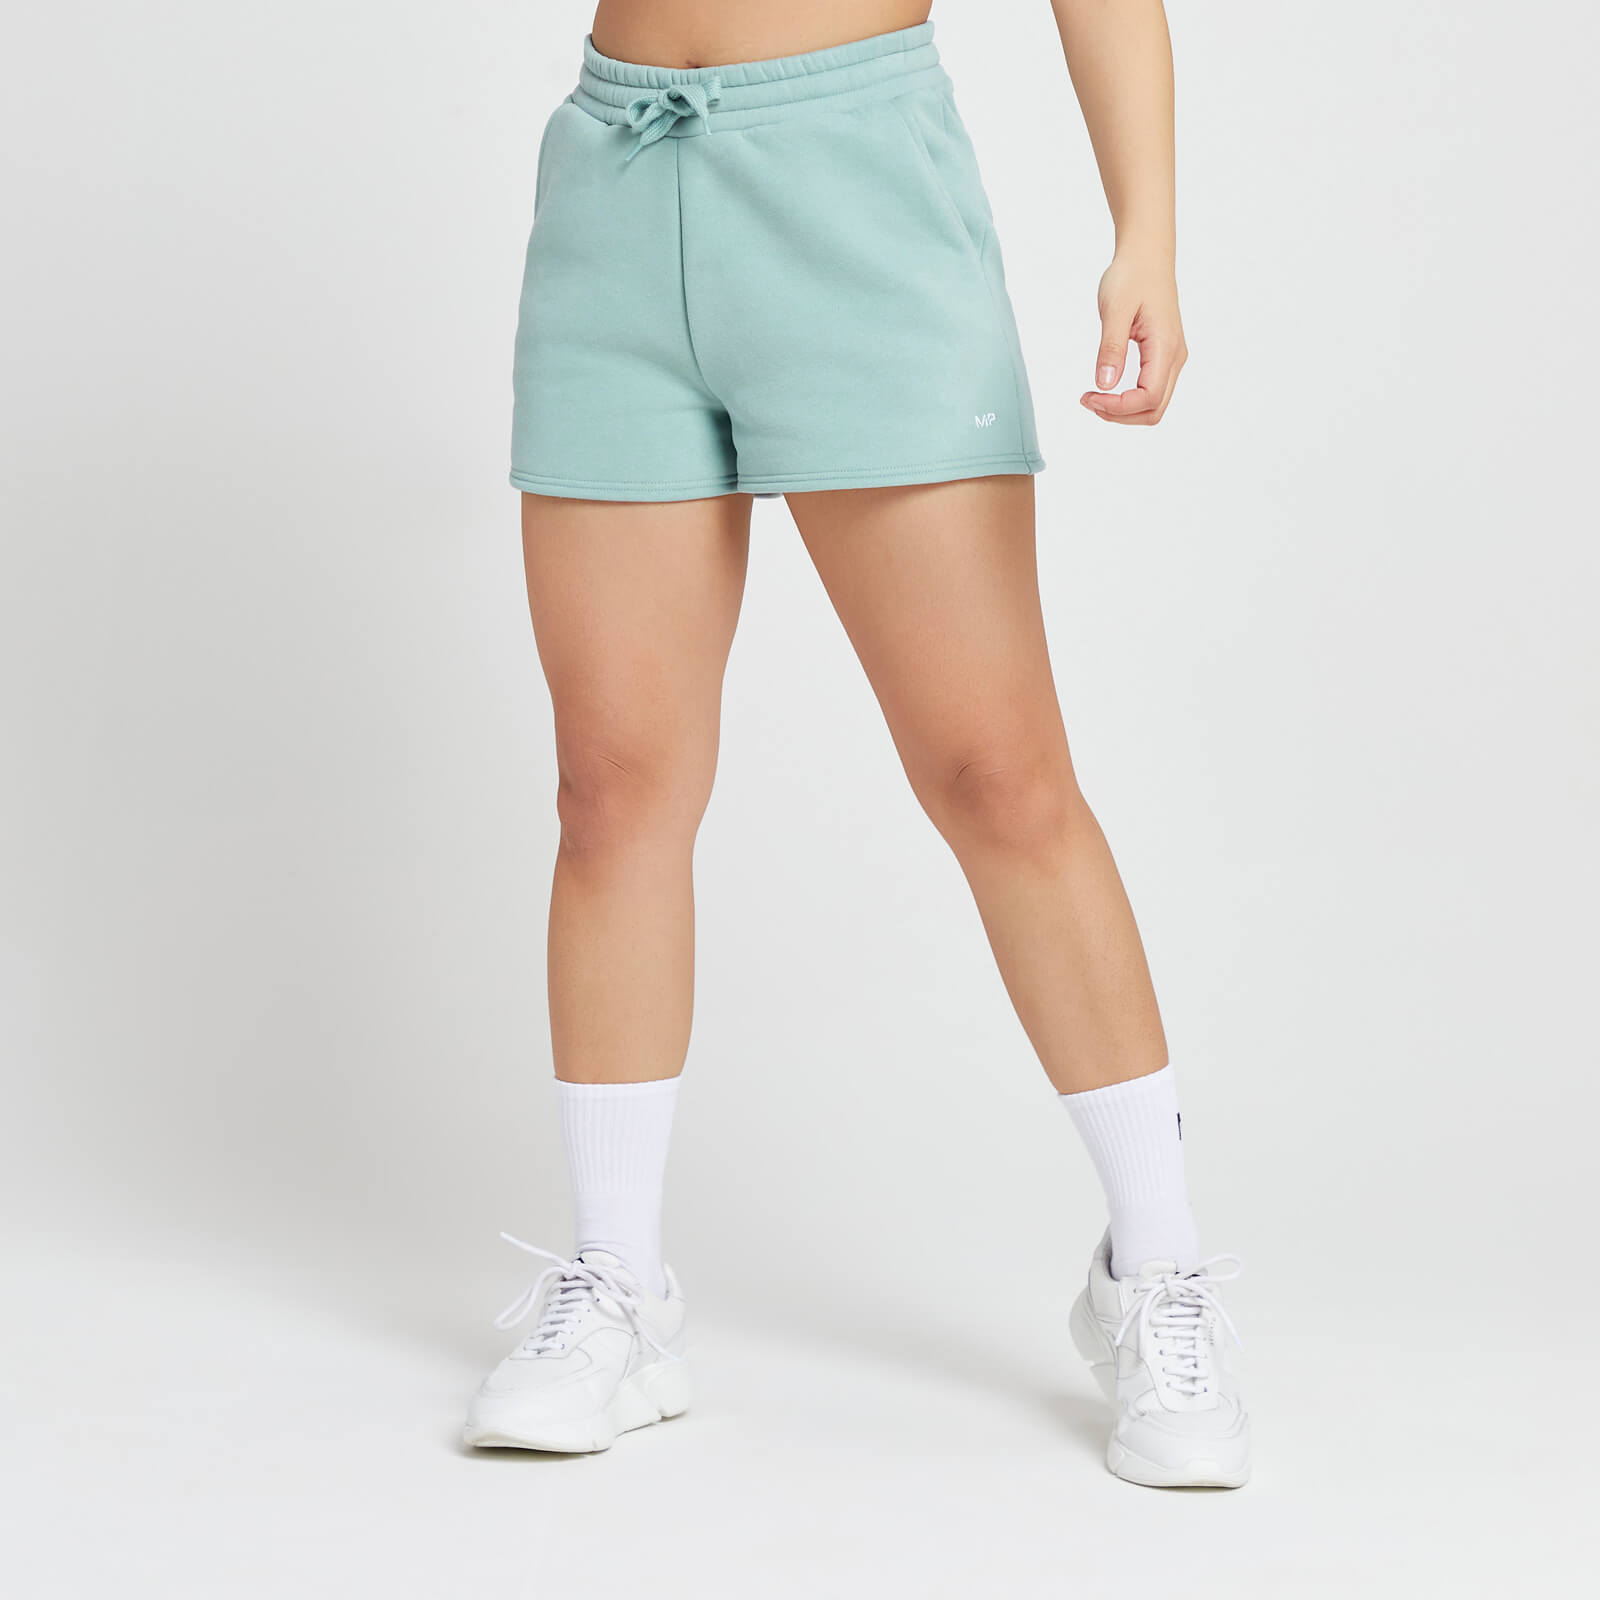 MP Women's Rest Day Lounge Shorts - Ice Blue - XXL product